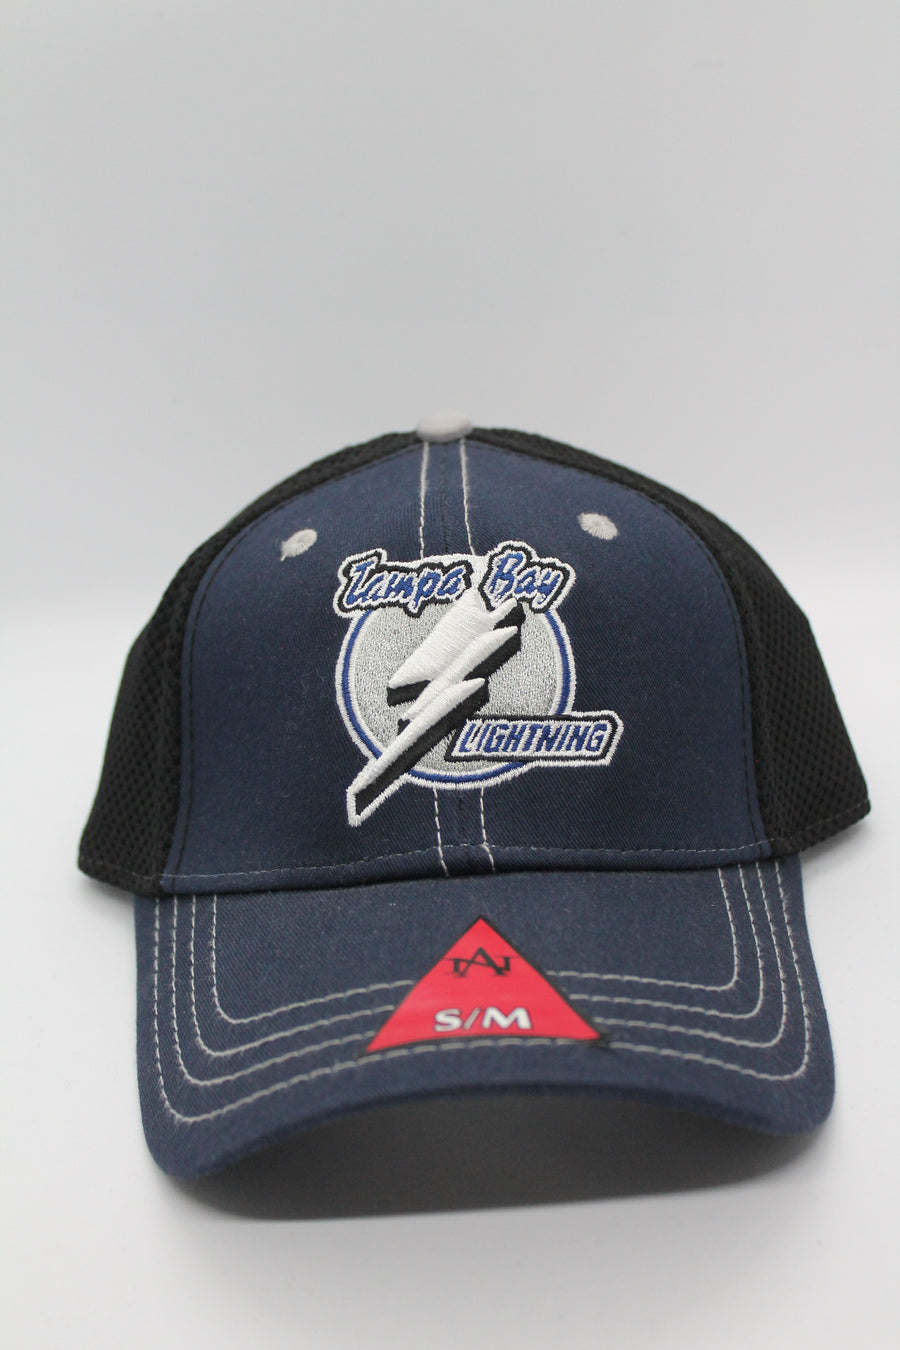 Tampa Bay Lightning clothing - JJ Sports and Collectibles